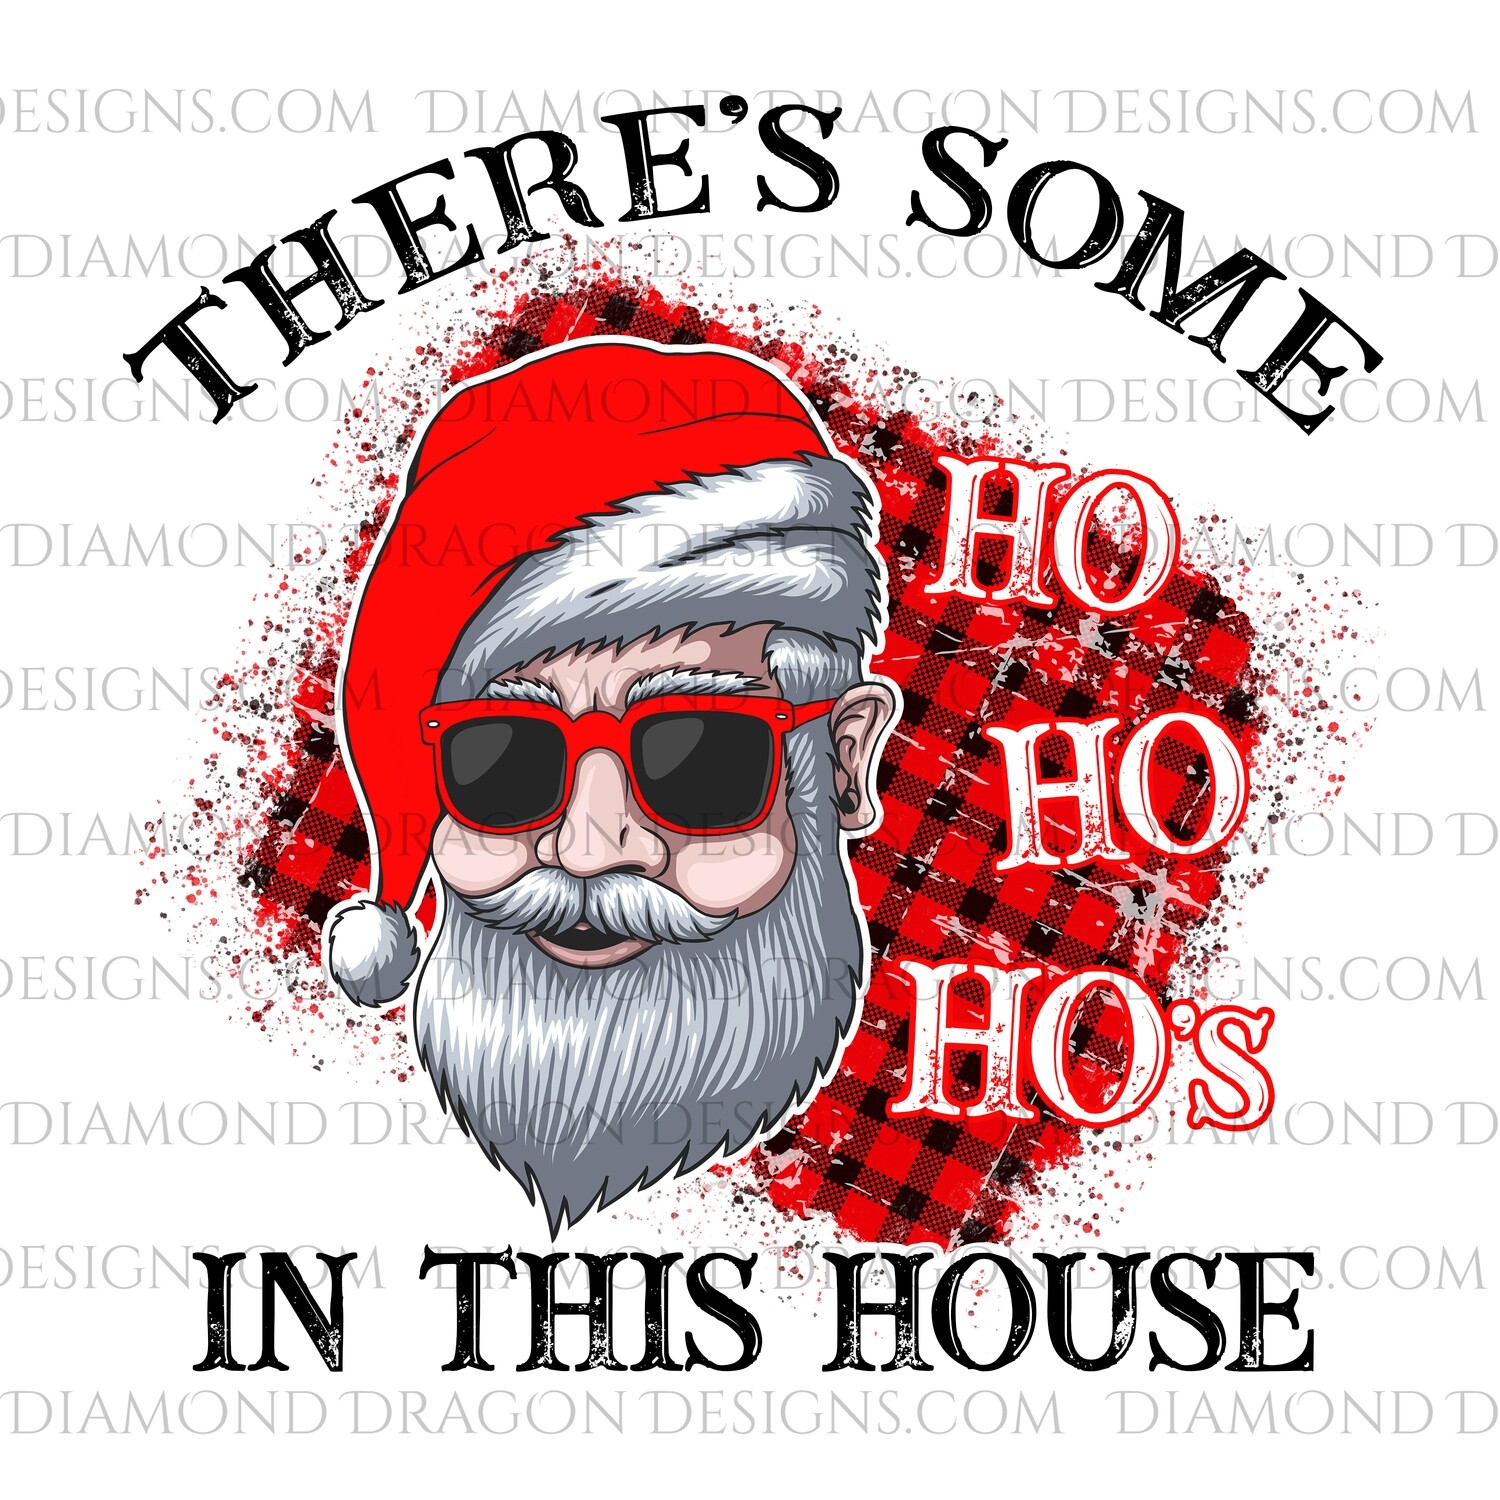 Christmas - Santa Sunglasses, There's Some Ho Ho Ho's in this House, #Holidays, Digital Image